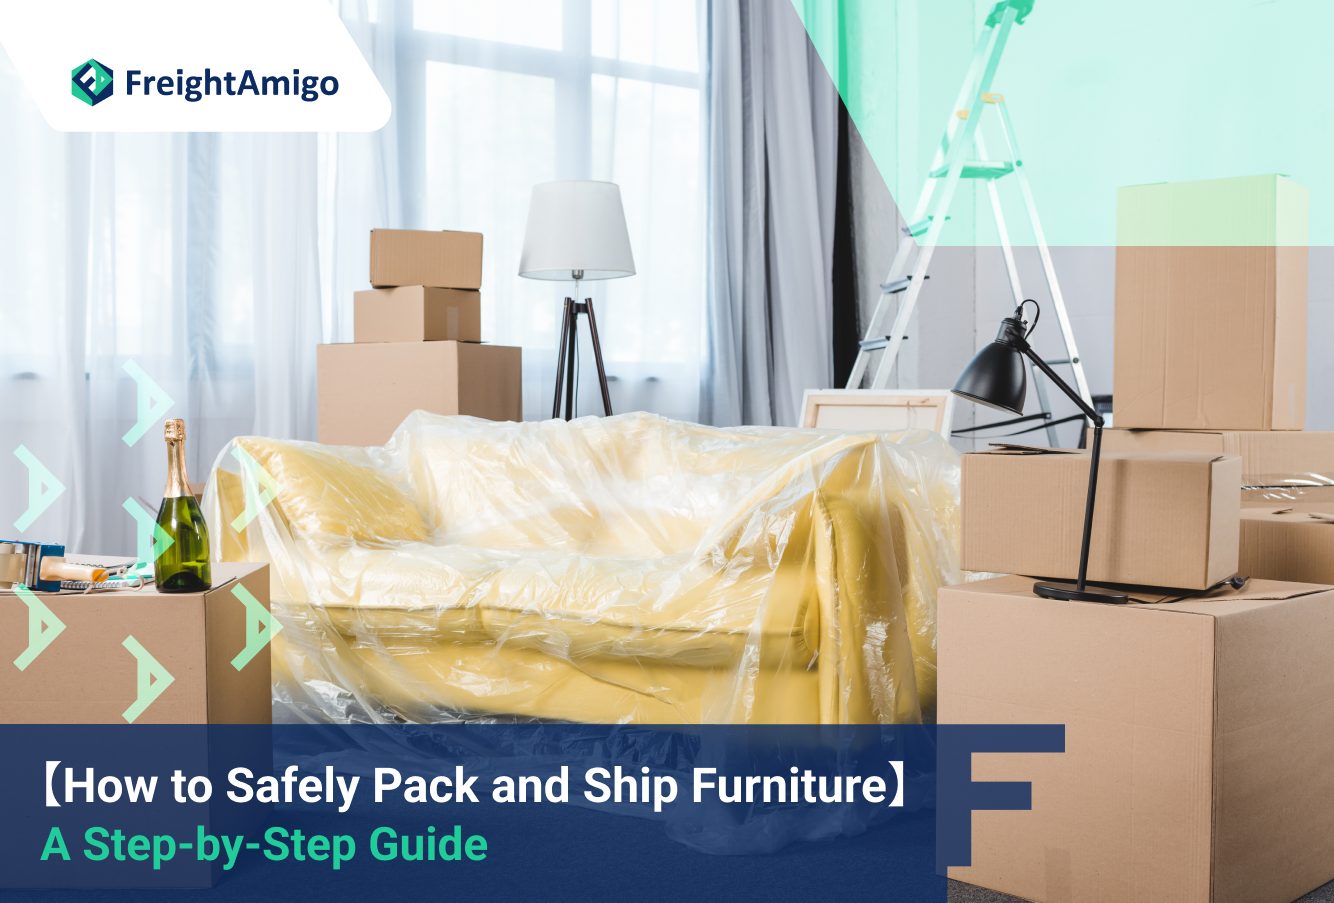 How to Safely Pack and Ship Furniture: A Step-by-Step Guide